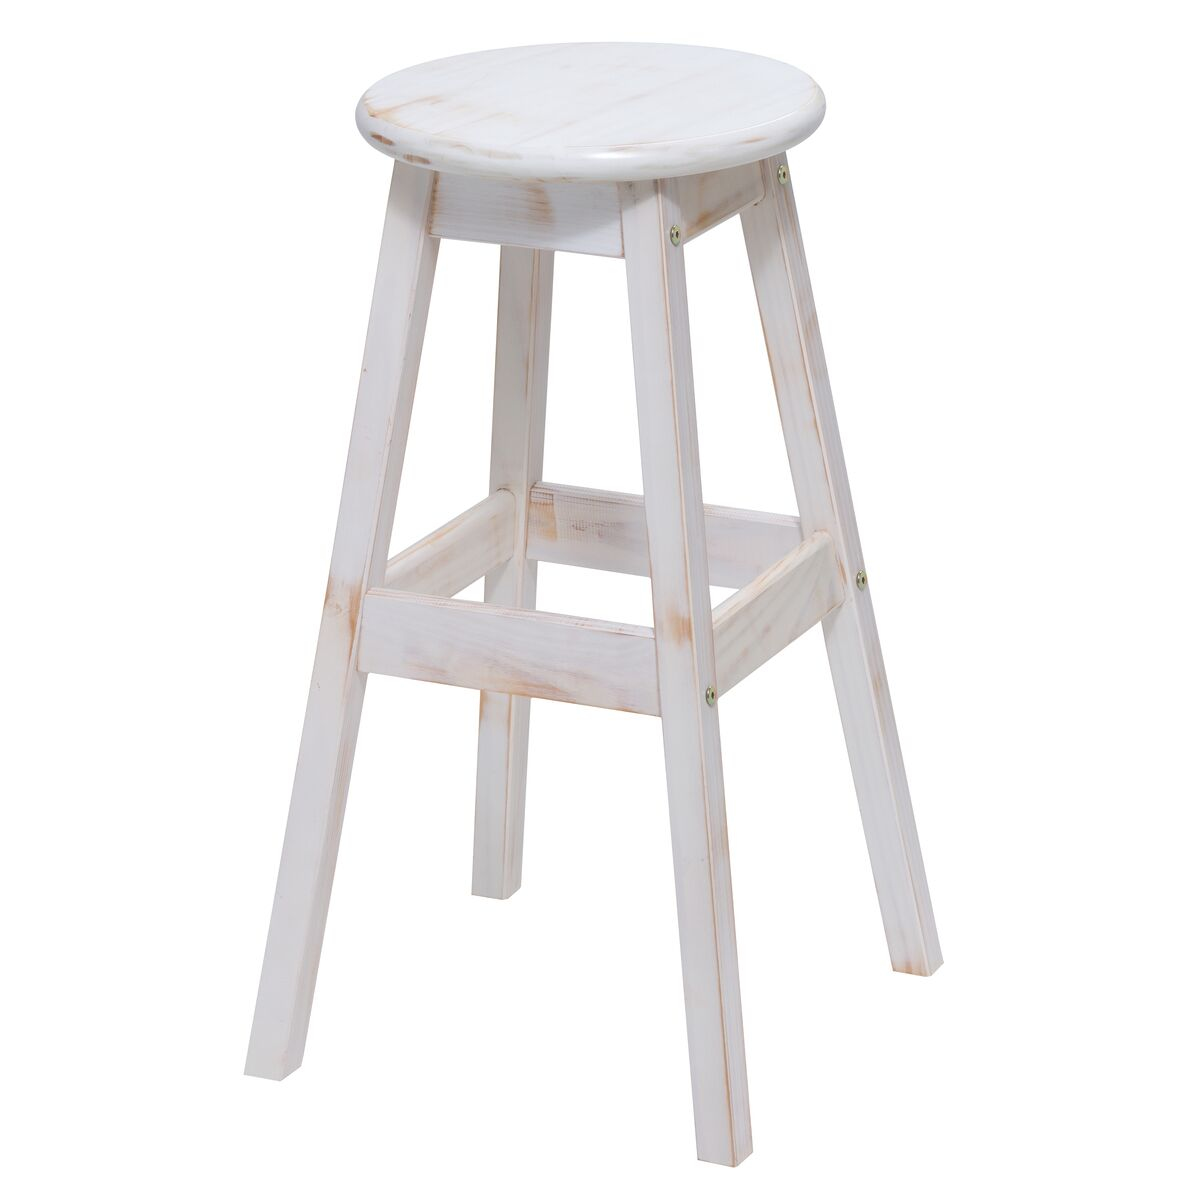 Tramontina White Wood Counter Stool with Rustic Finish
